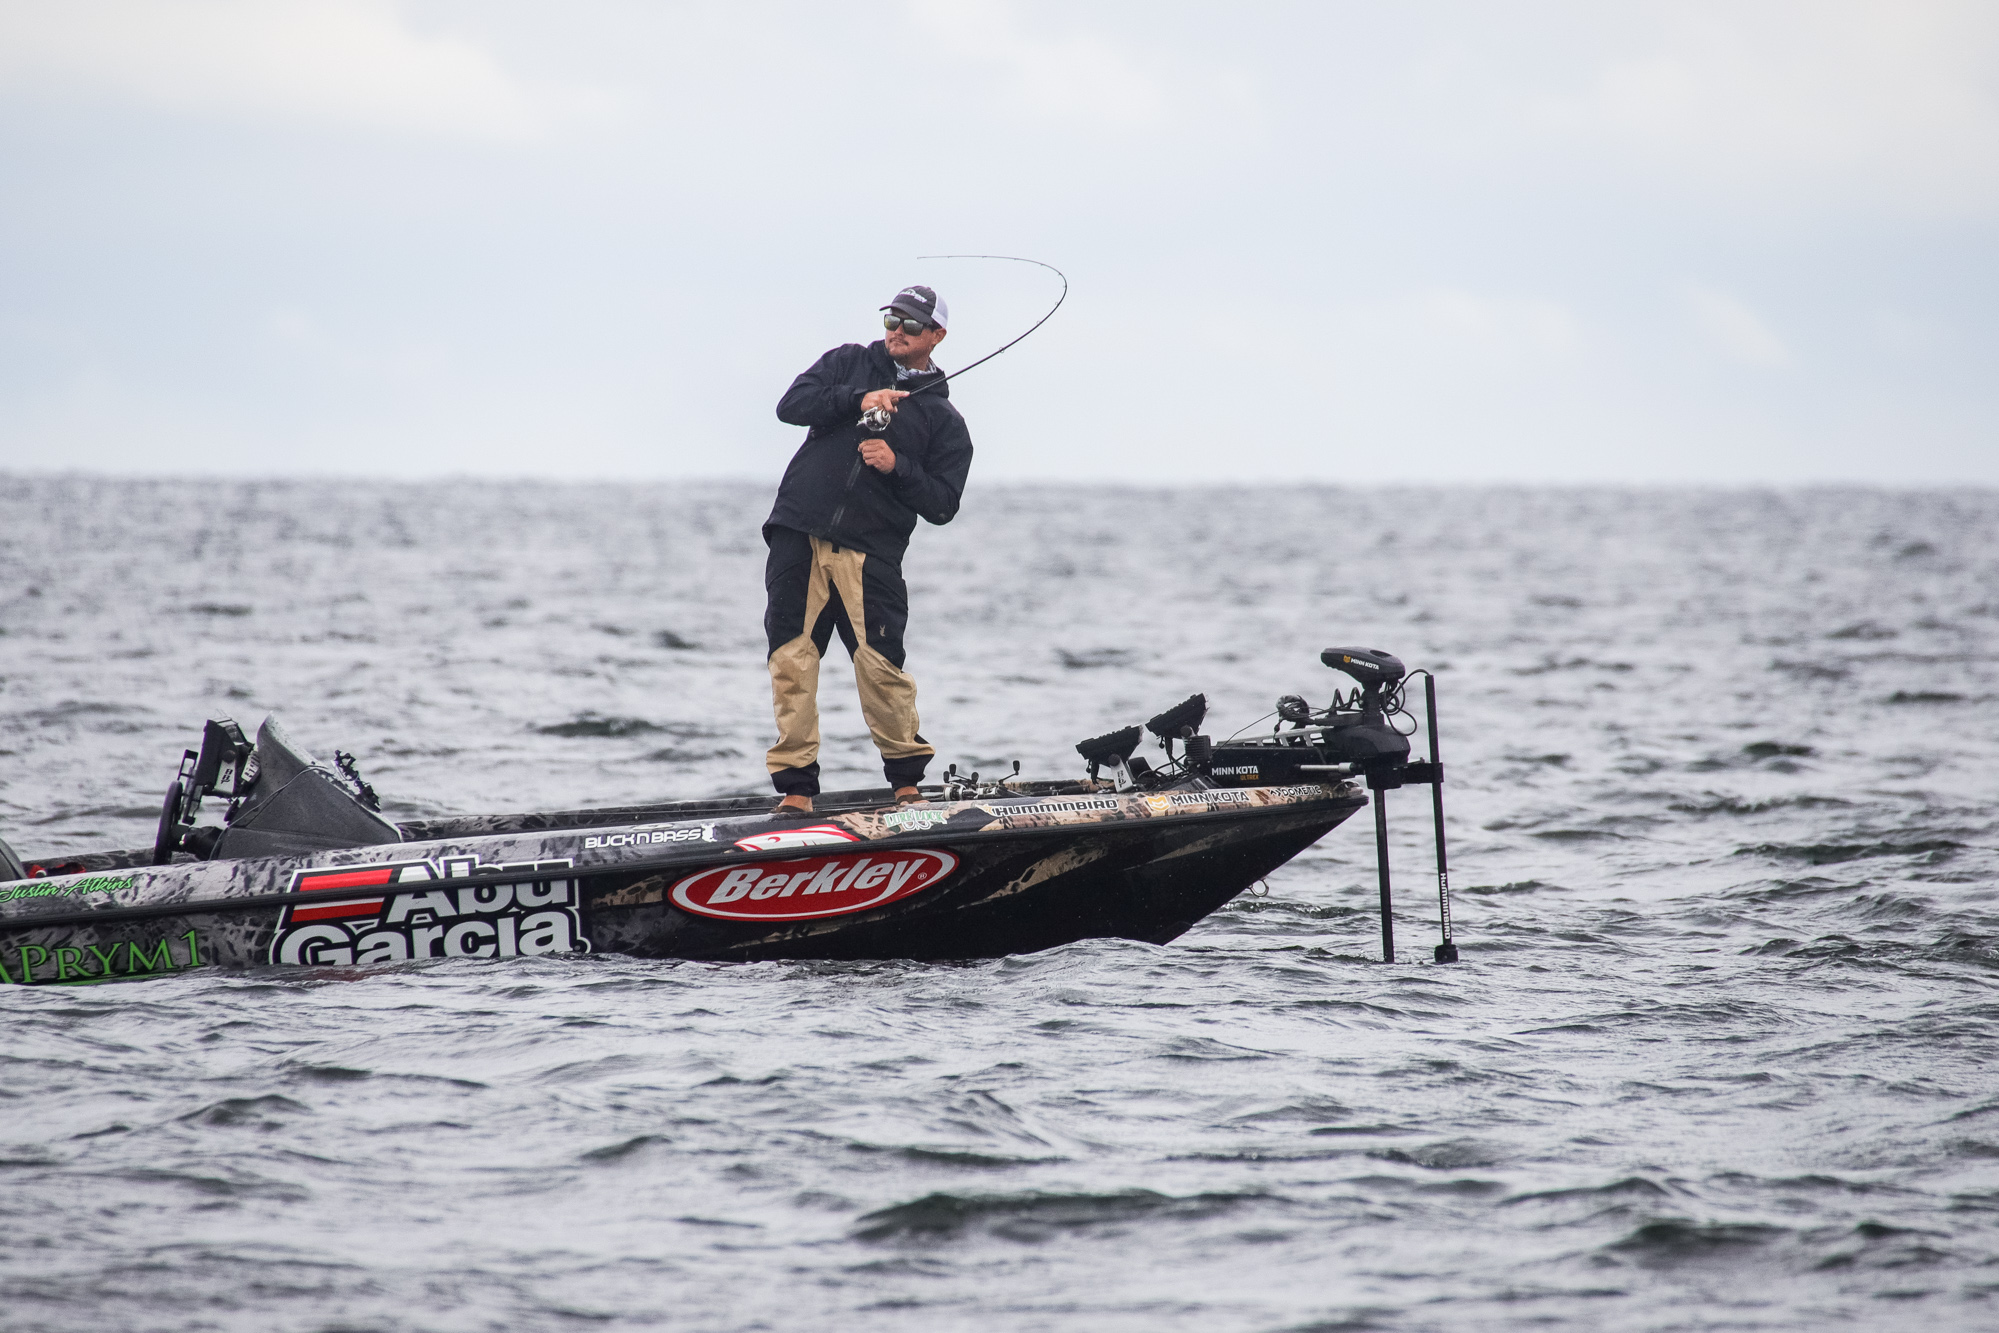 Mitchell's First Look at Sturgeon Bay - Major League Fishing